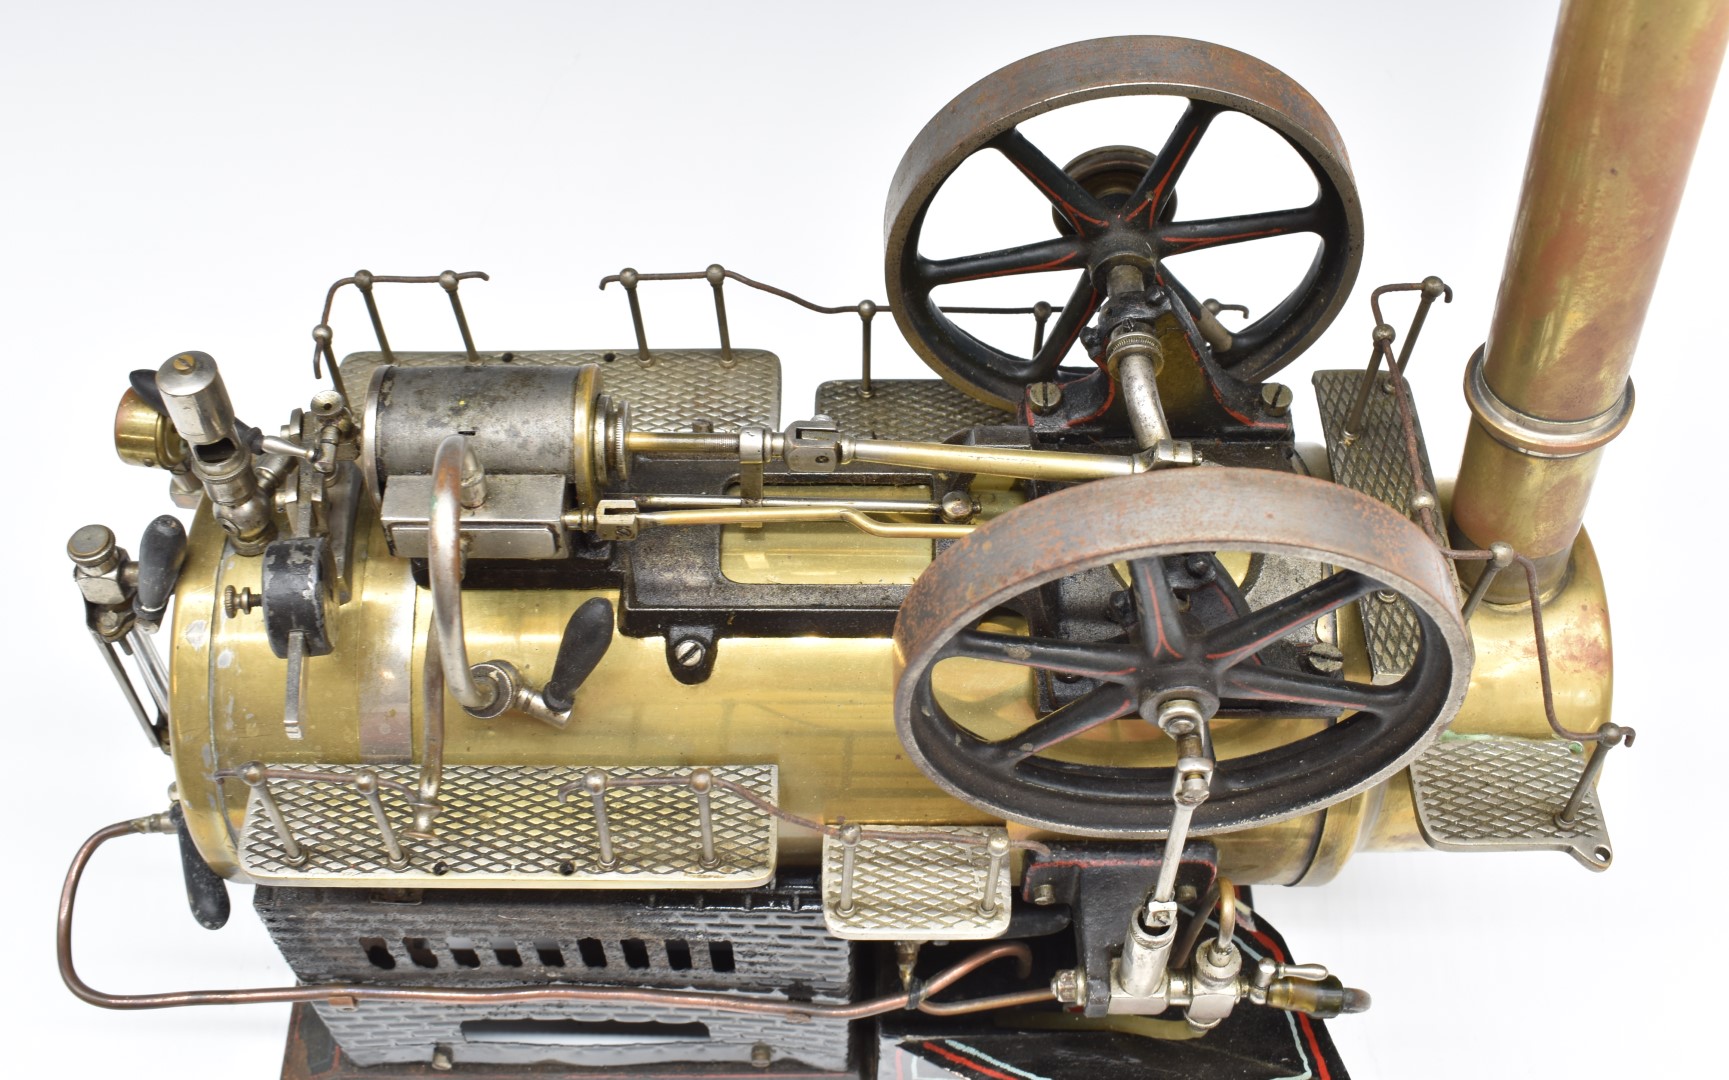 Doll model 520 overtype live steam engine with single cylinder, with twin fly wheels, lever safety - Image 5 of 7